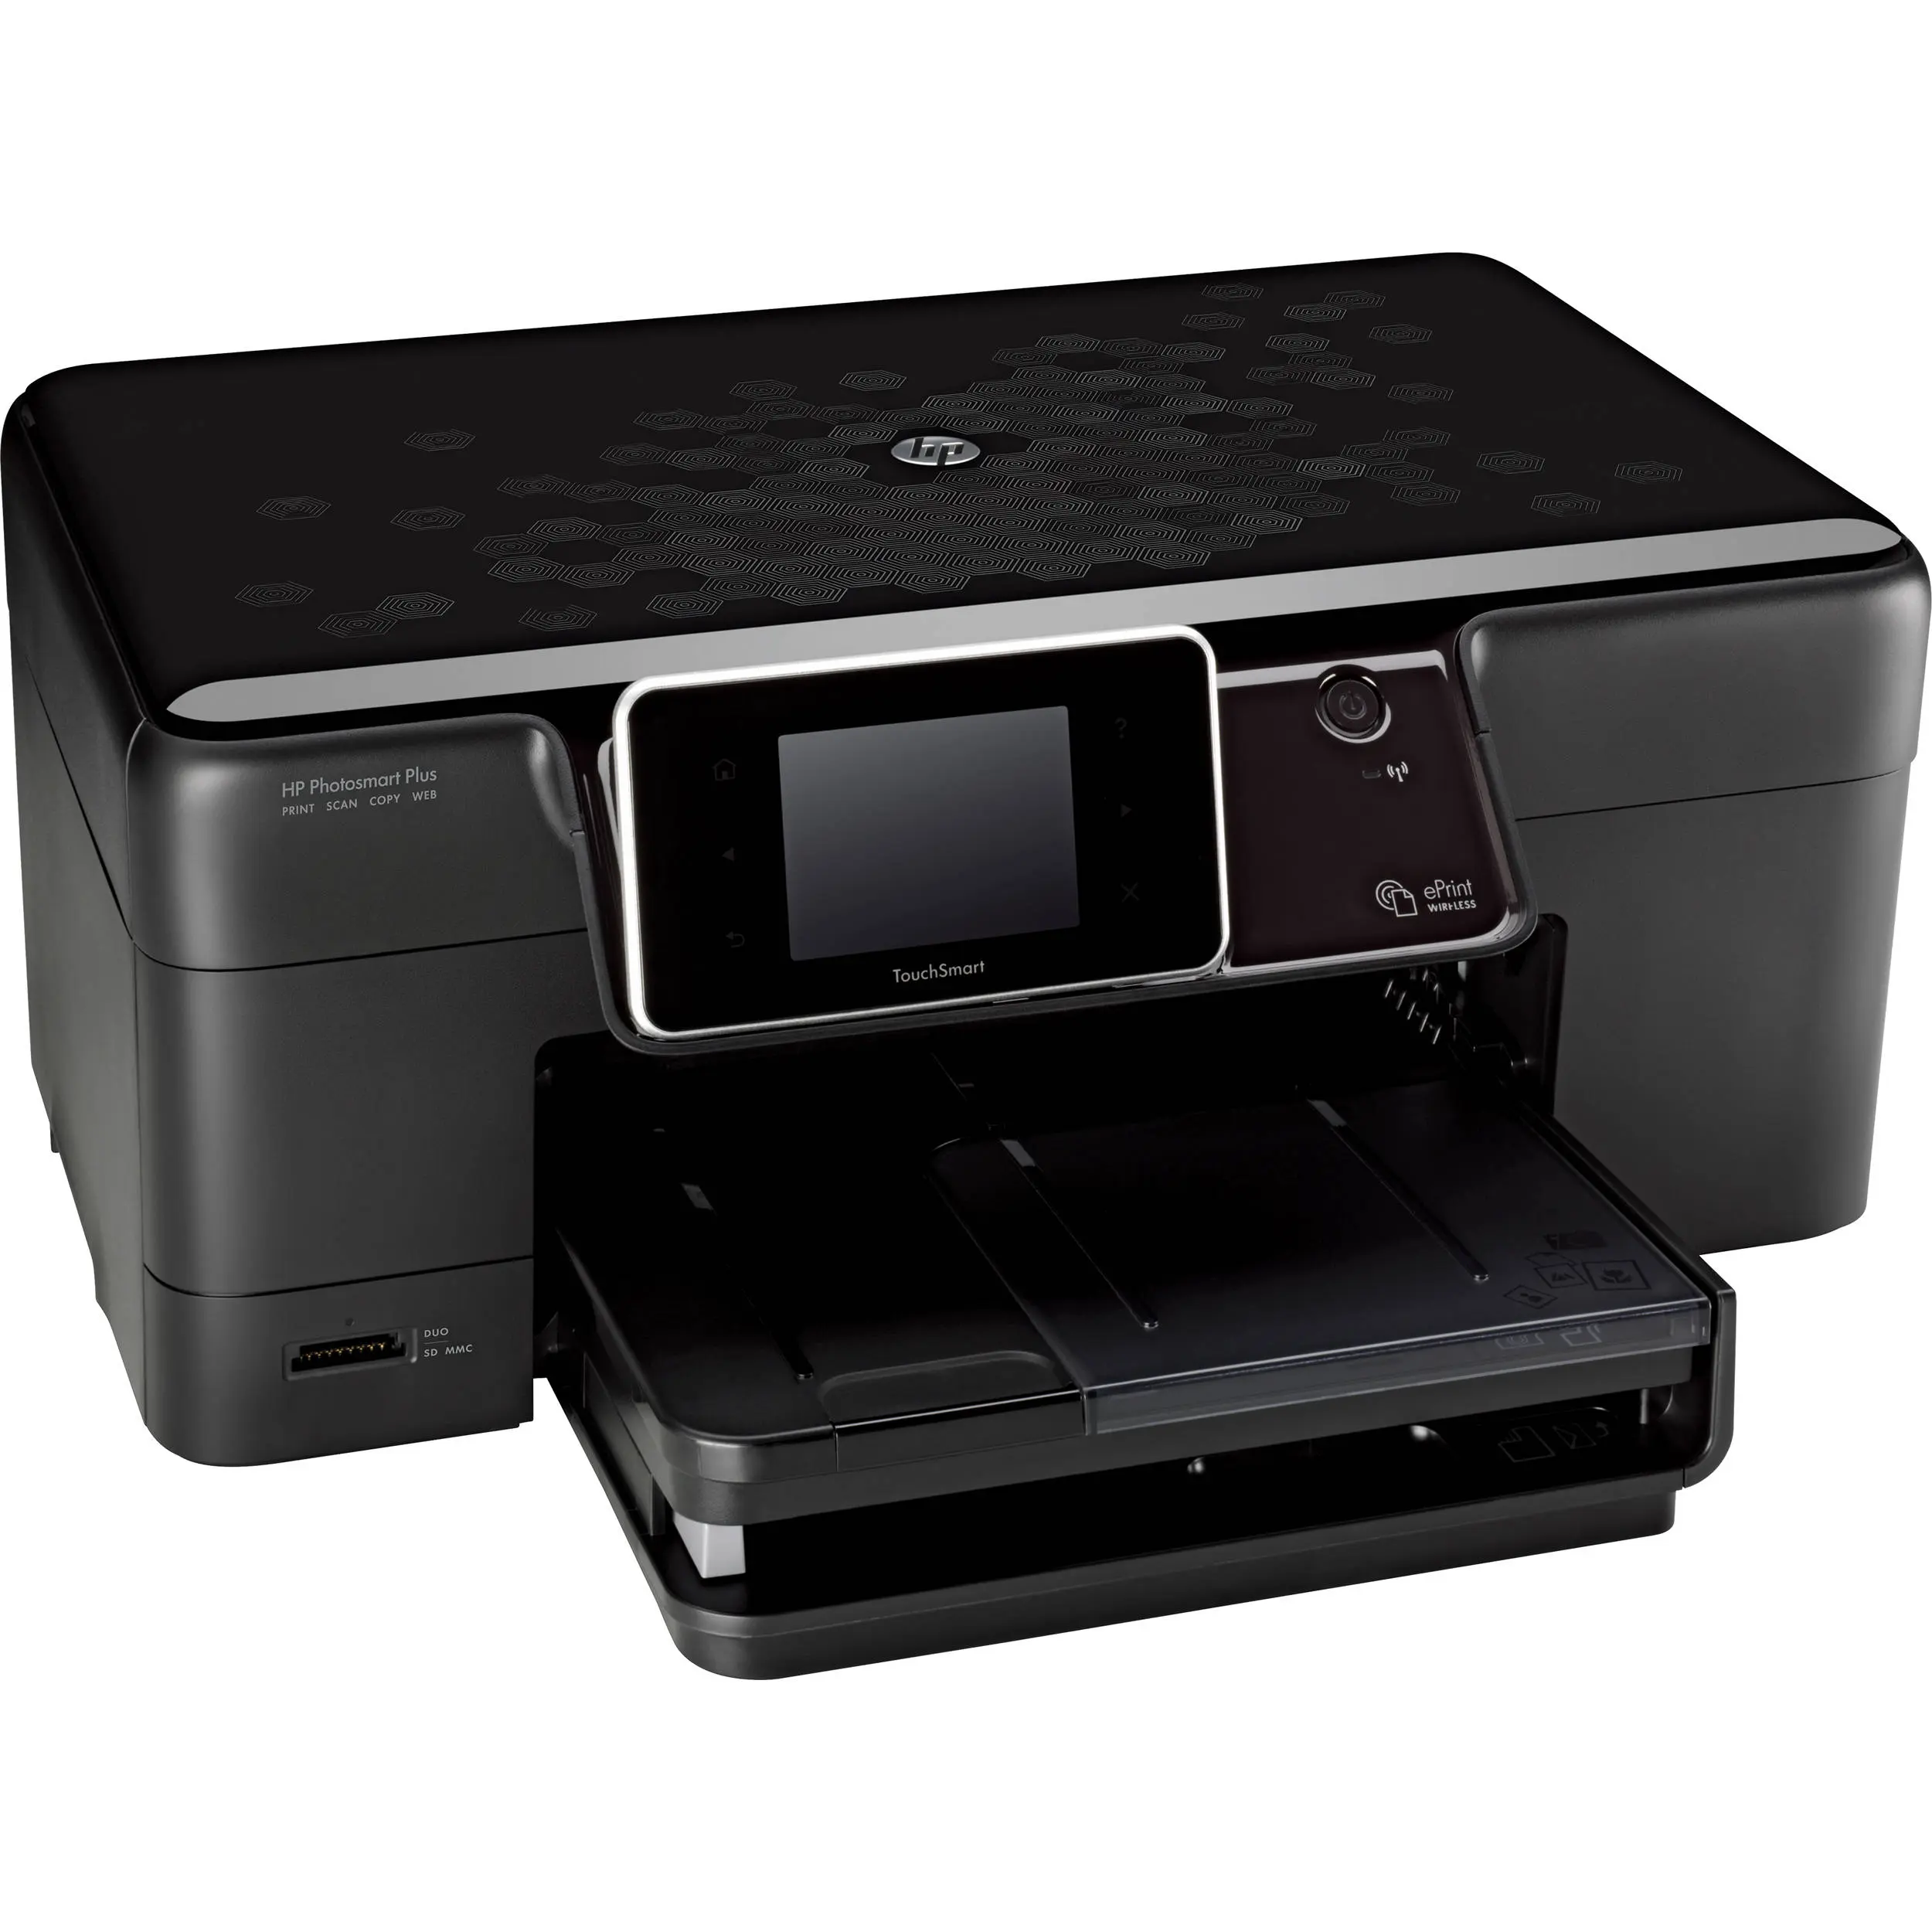 hewlett packard eprint compatible printers - Which printers have ePrint